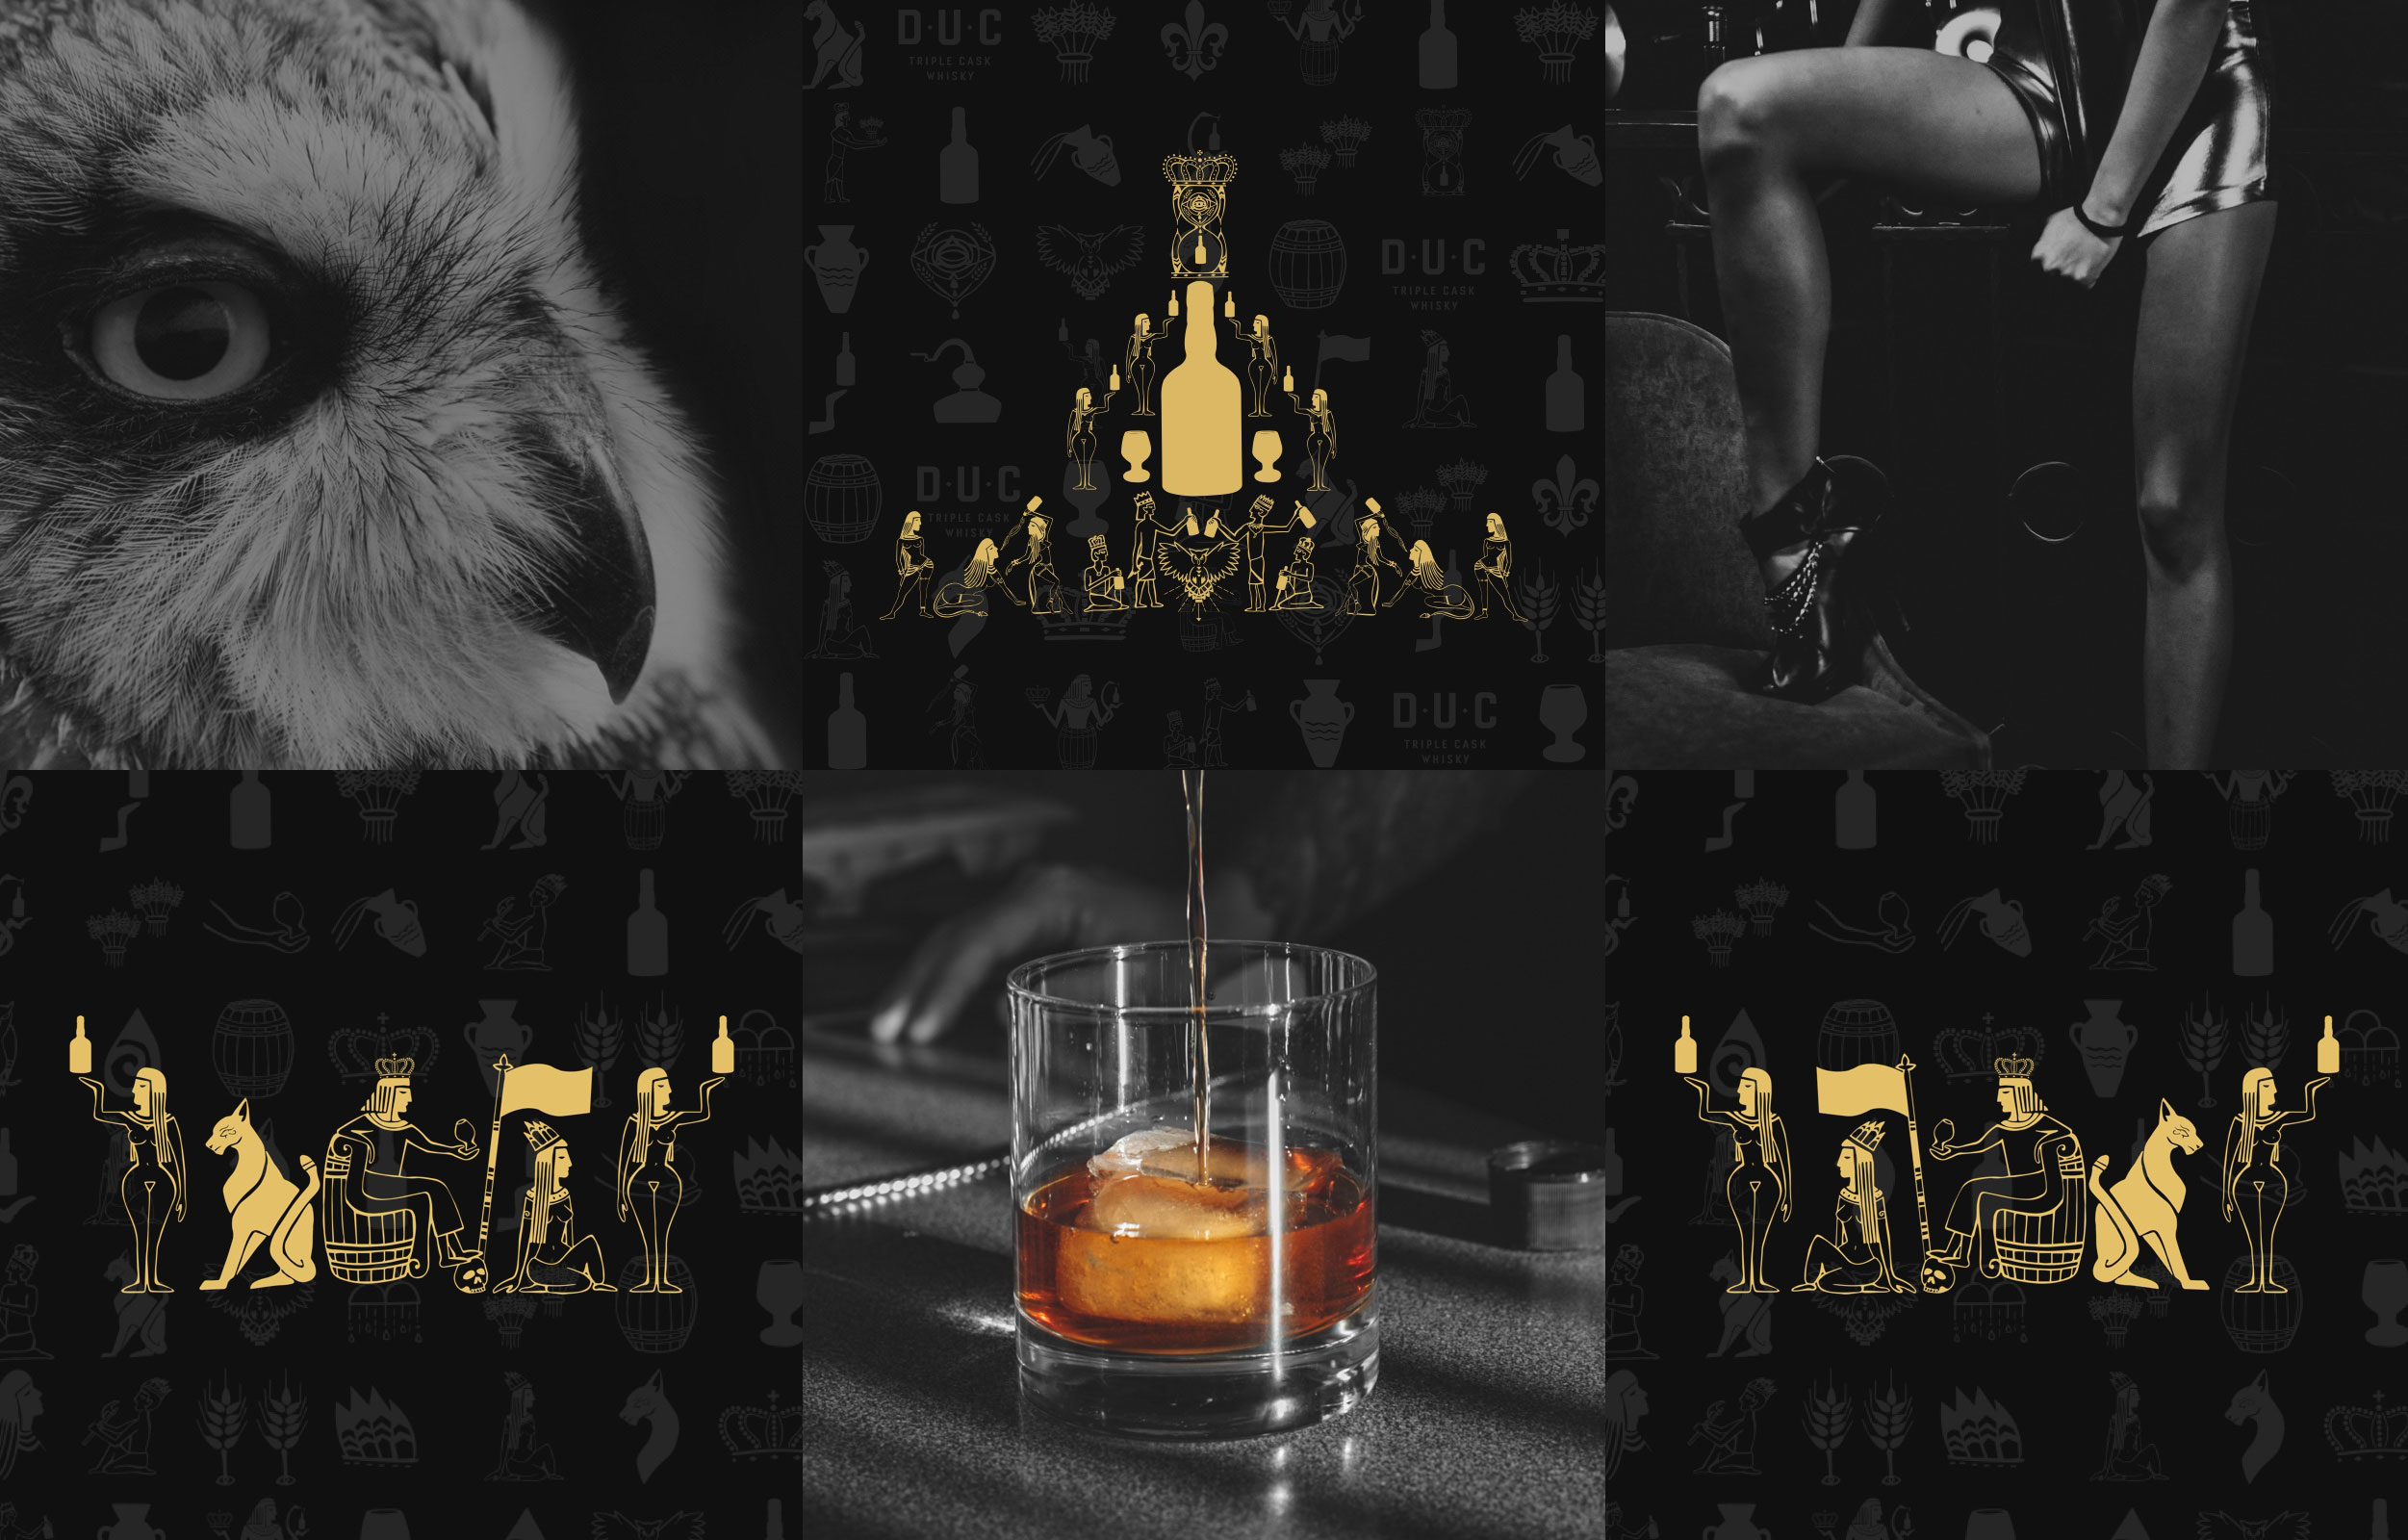 D.U.C Whisky Website | The Brand Collective